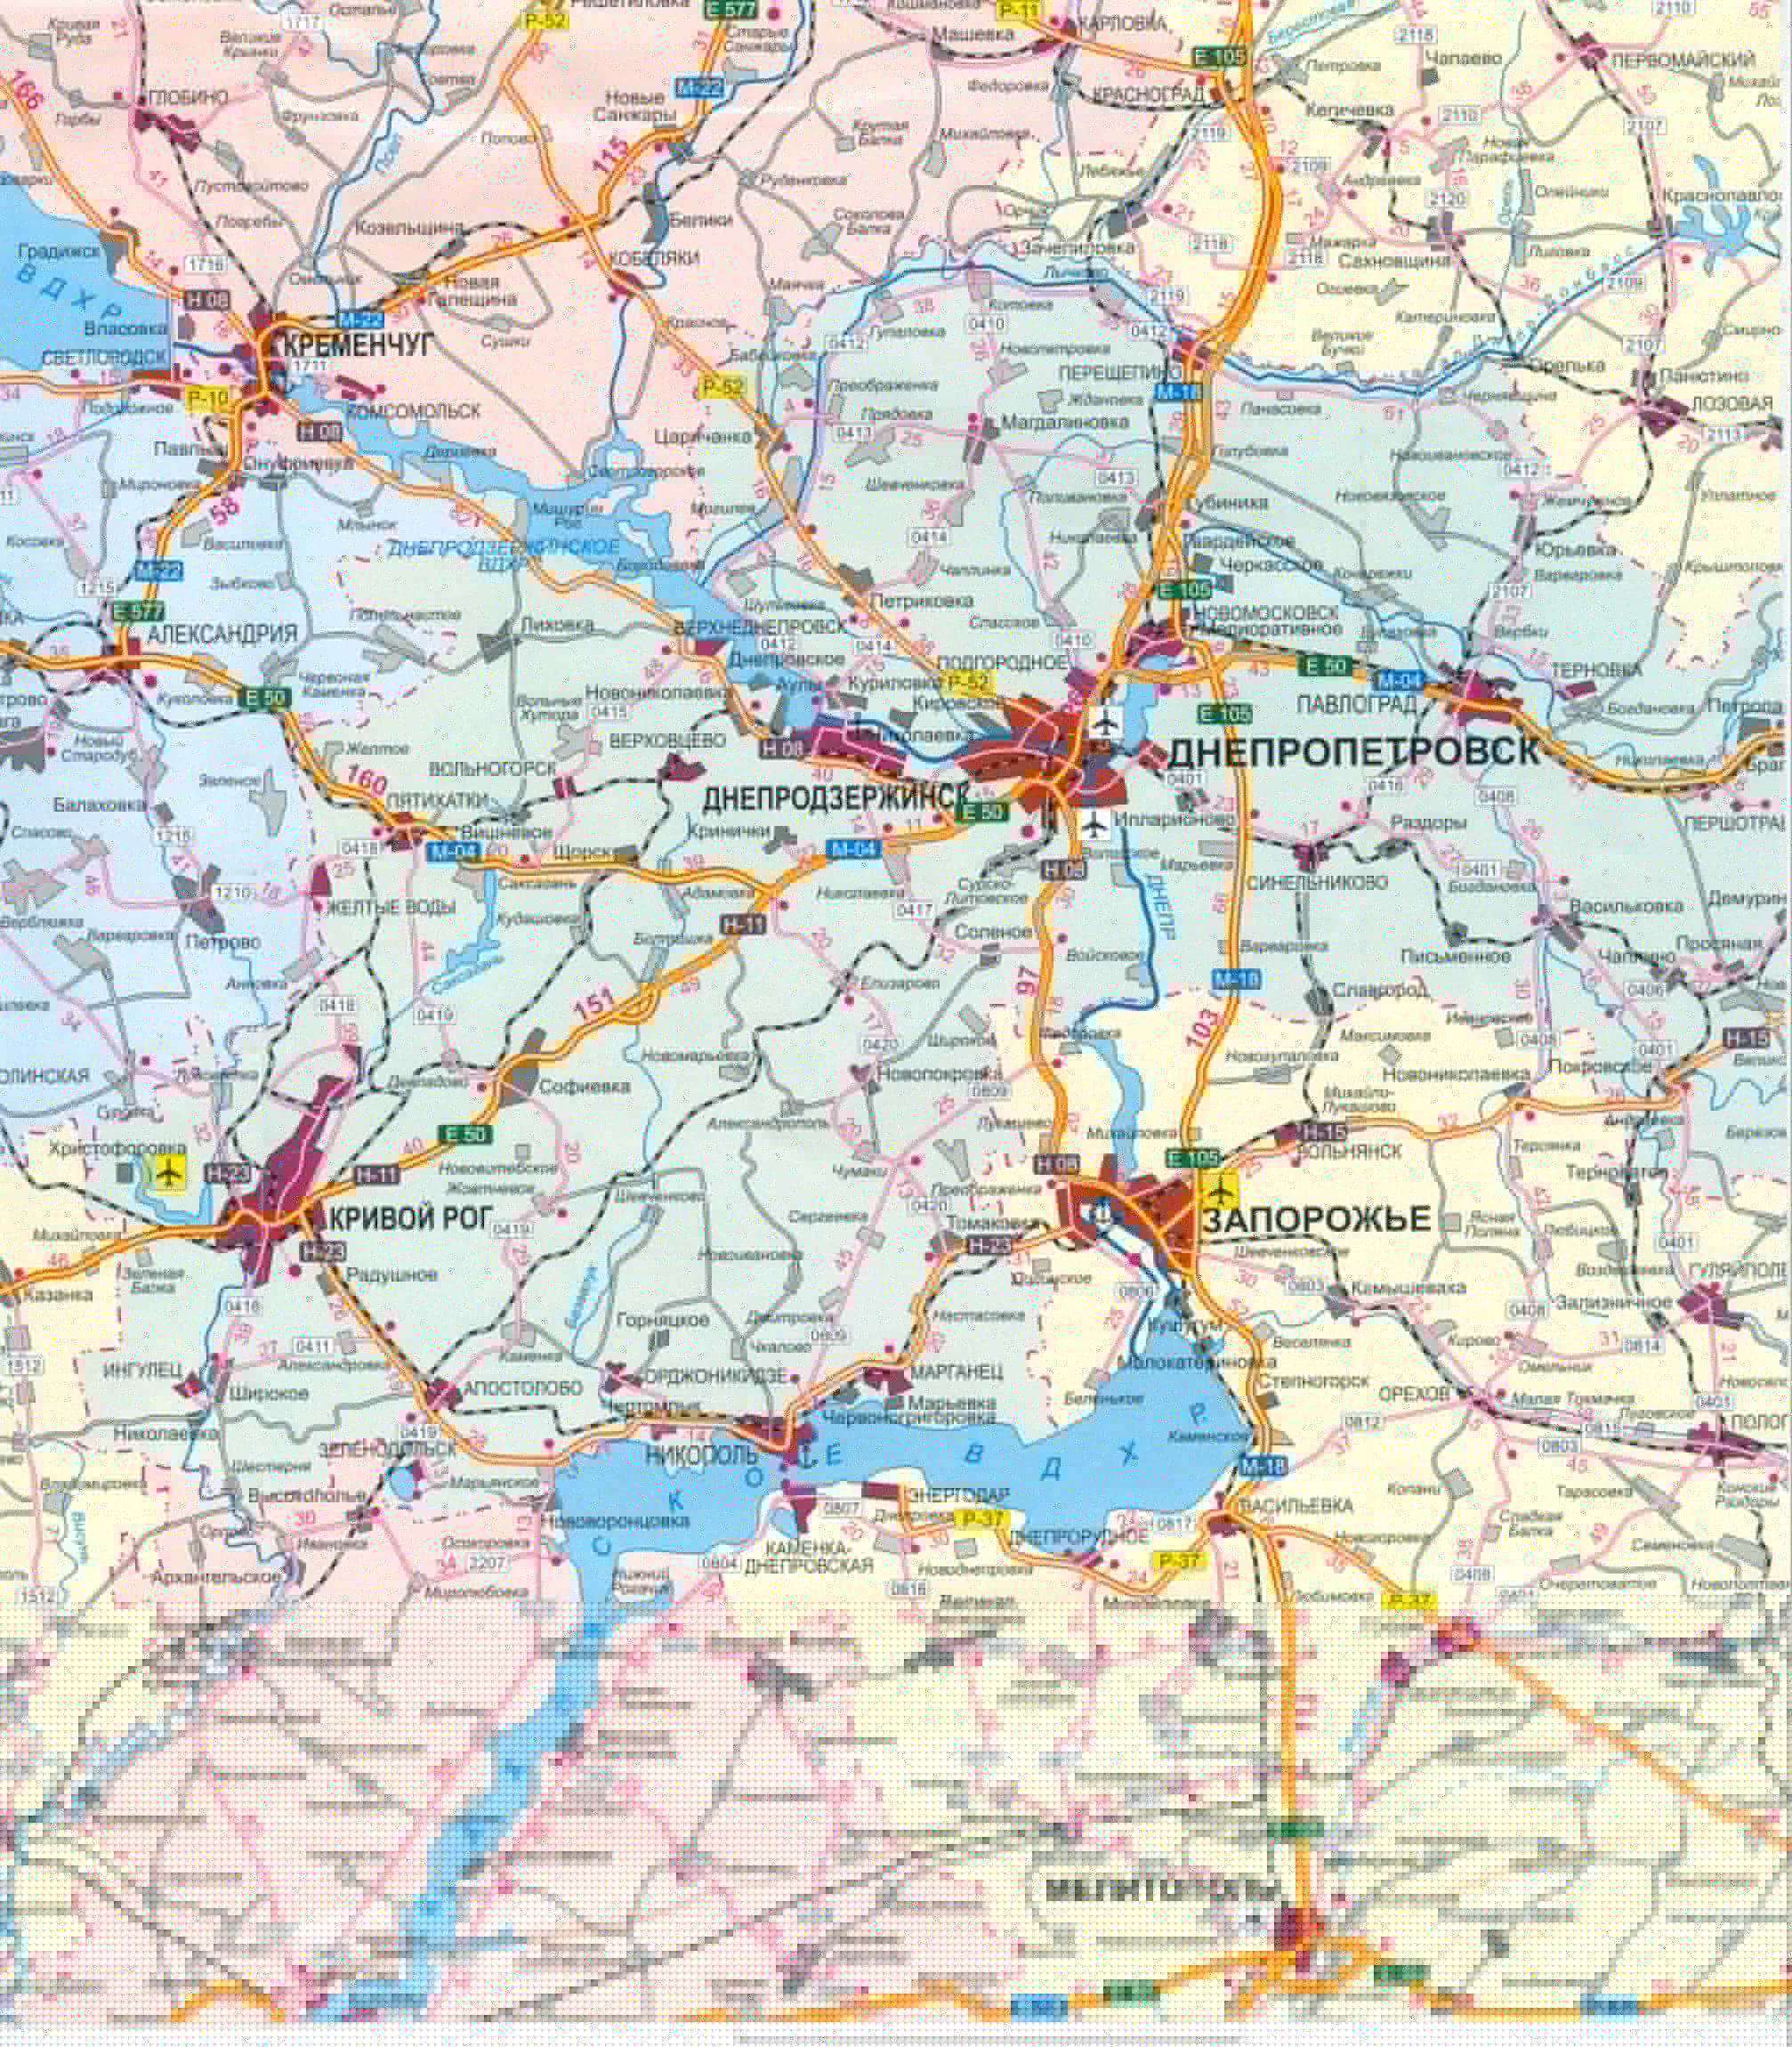 The map of Ukraine is free of charge. Map of roads of Ukraine free download. Large map of Ukraine's roads for free, D1